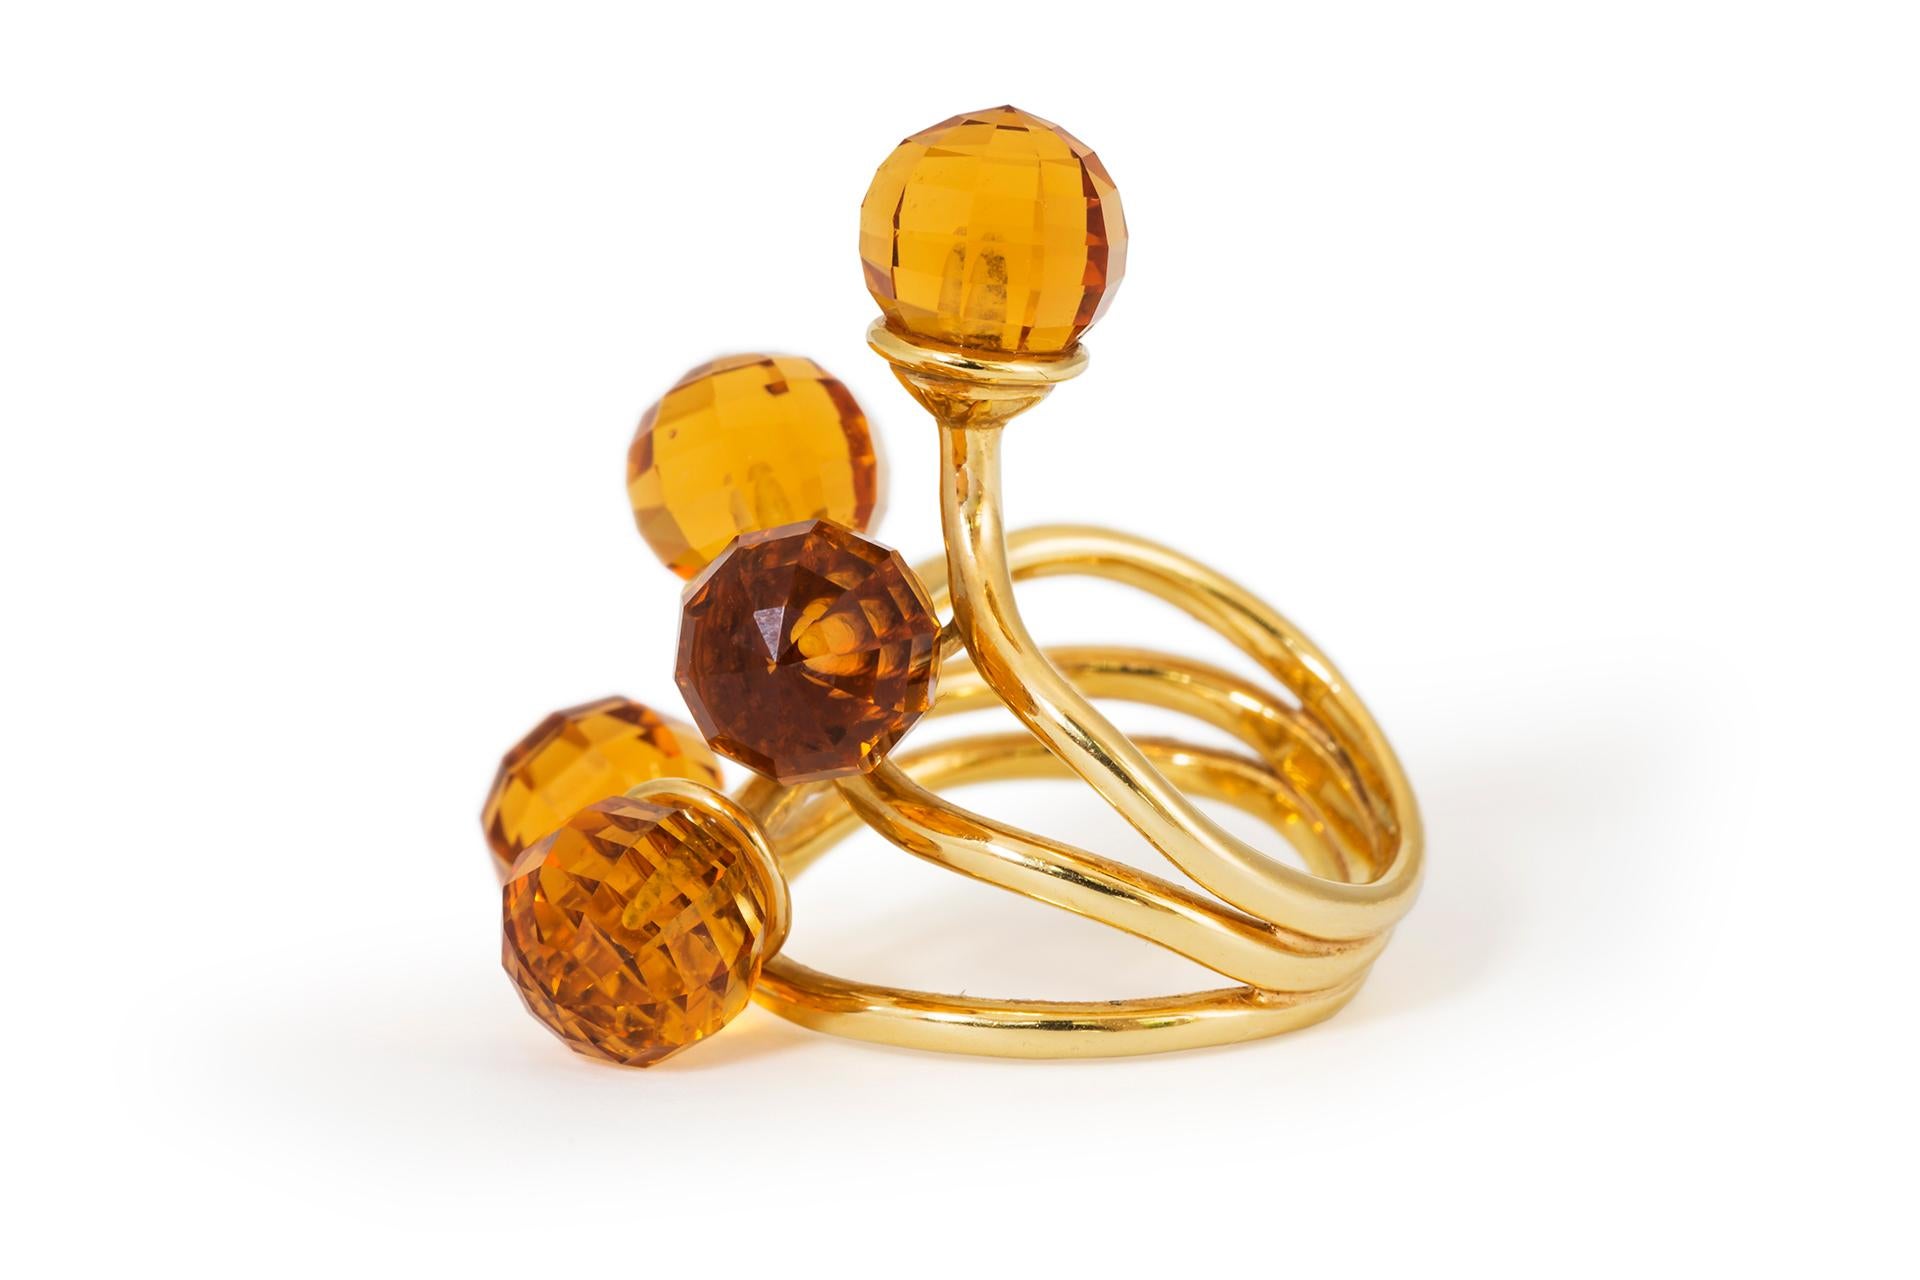 Madeira citrine ring featuring five briolette cut gemstones set with interwoven 18ct gold bands to form an unusual contemporary design. 

Size 5.5
Length 3cms 
Width 2cms 
Weight 13.6gms 